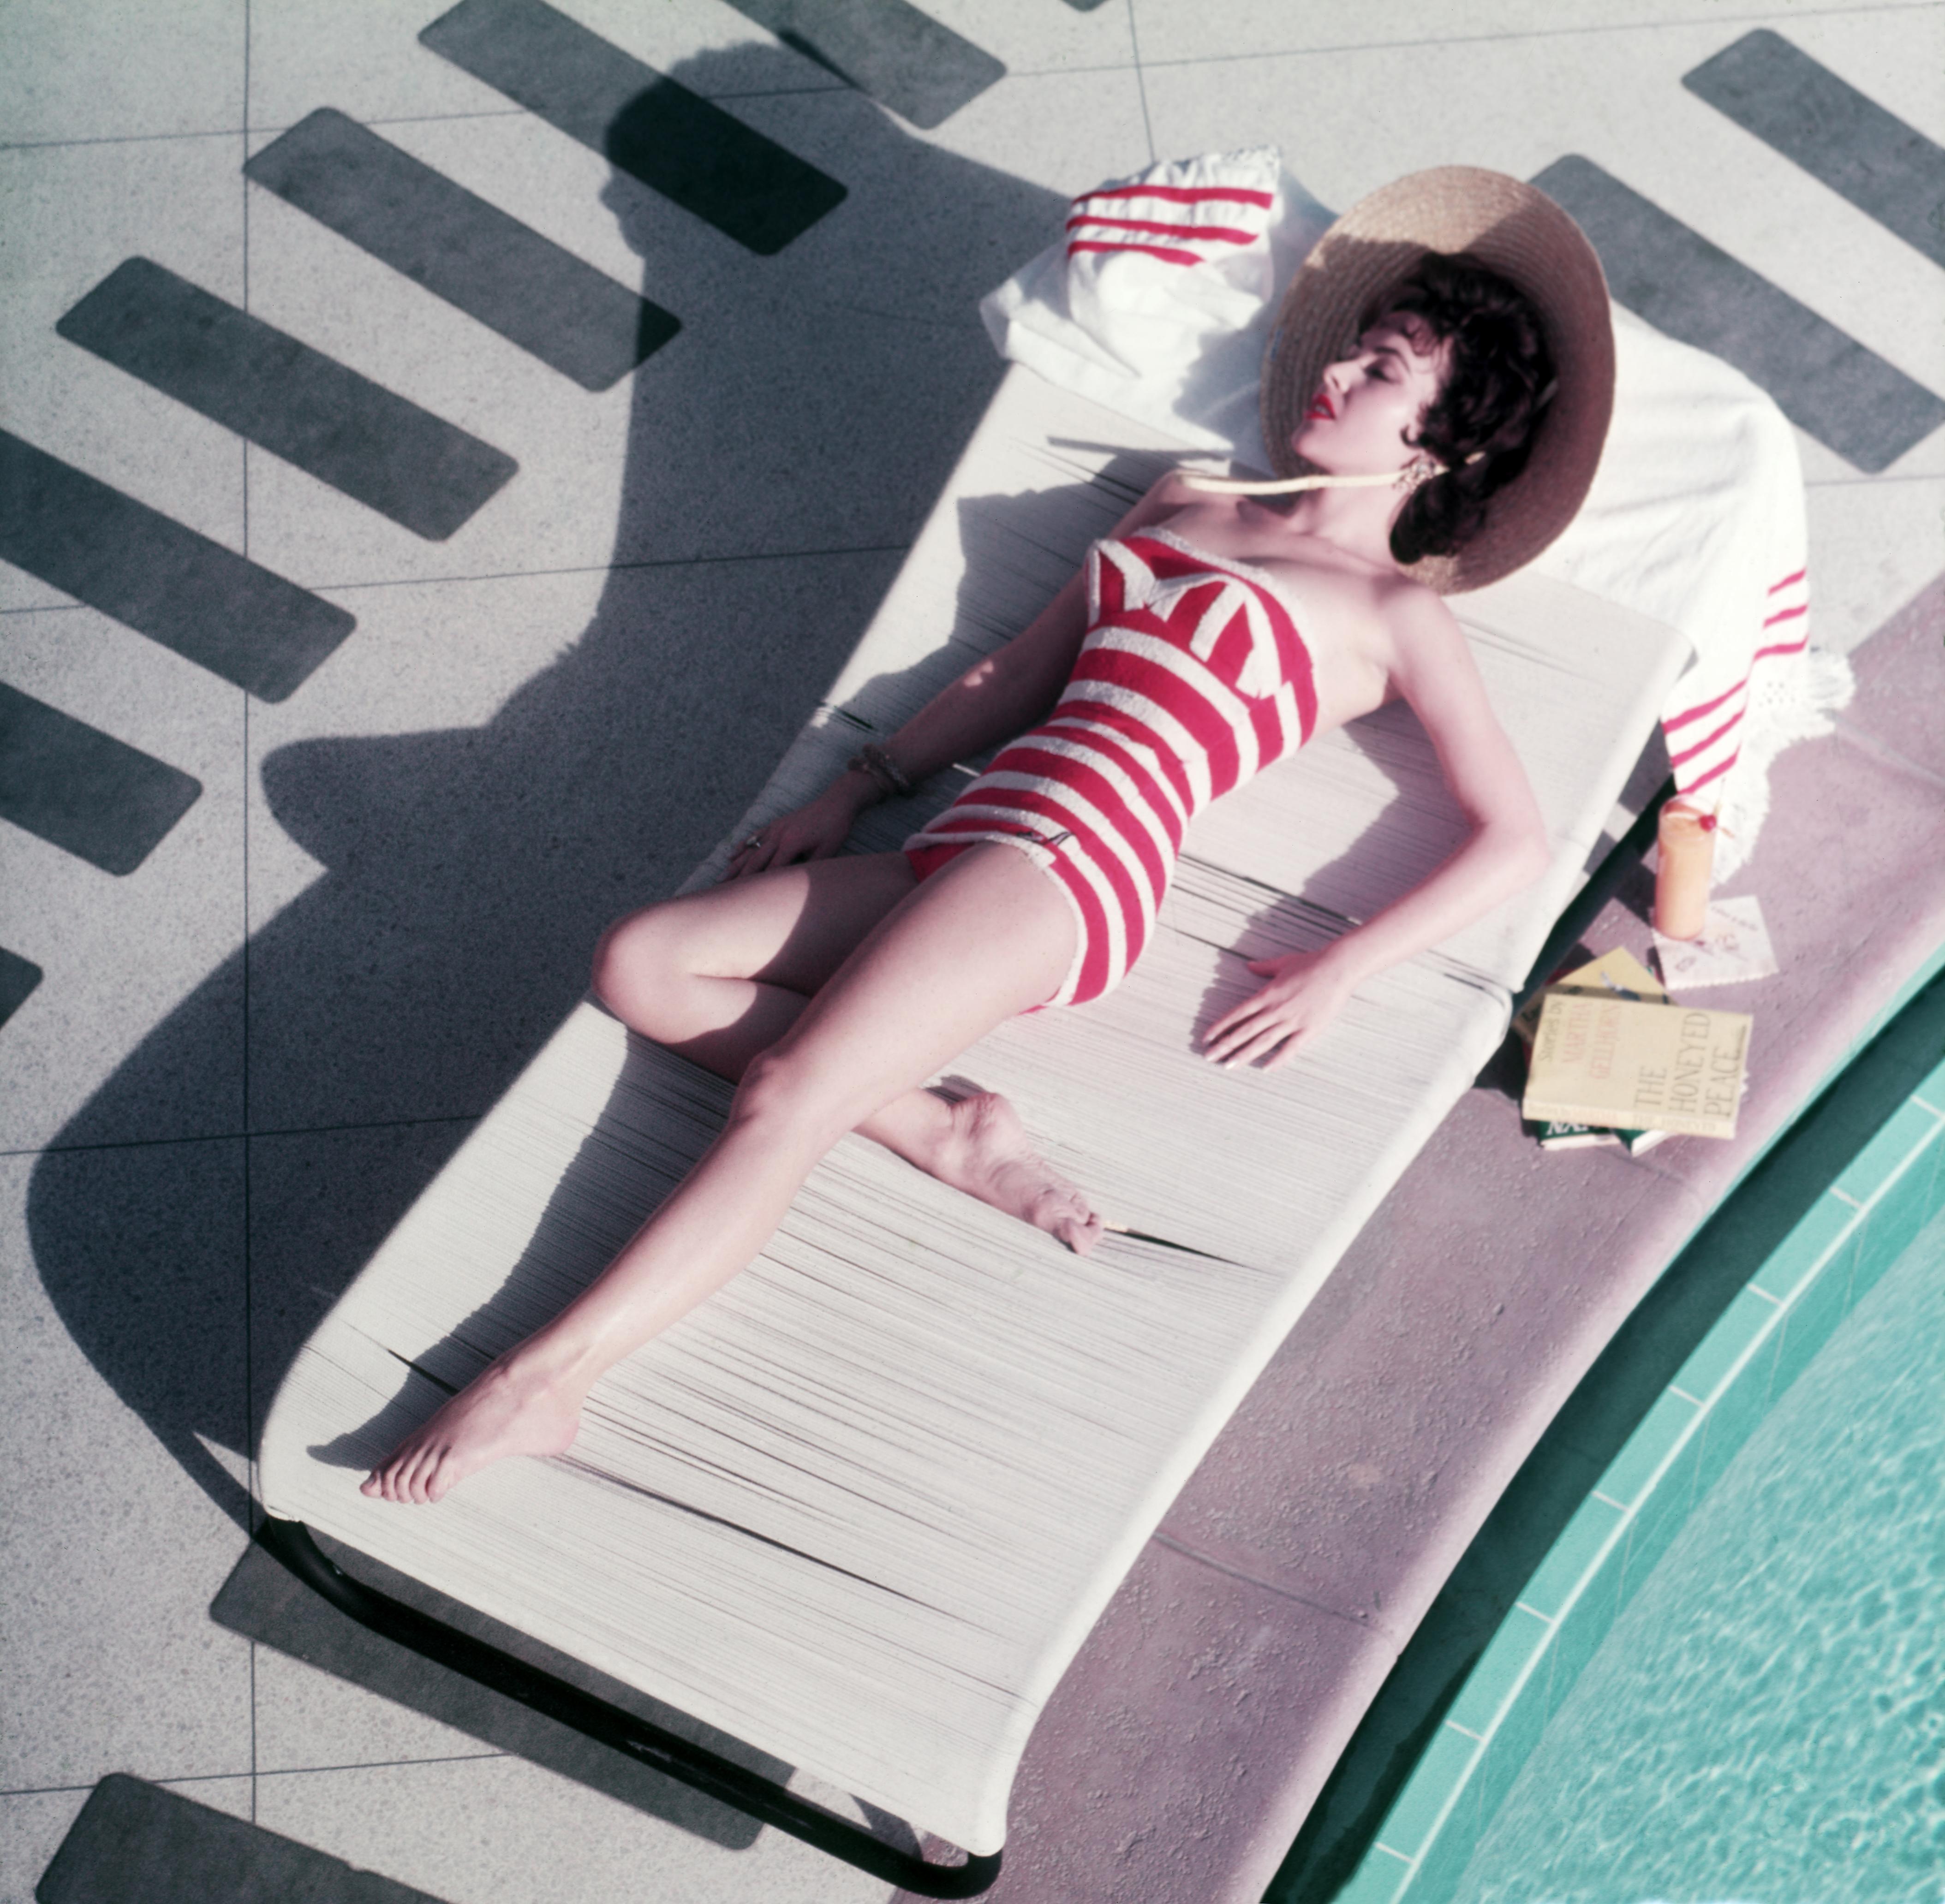 'Mara Lane At The Sands' 1954 Slim Aarons Limited Estate Edition

Austrian actress Mara Lane lounging by the pool in a red and white striped bathing costume at the Sands Hotel, Las Vegas, 1954. 

Produced from the original transparency
Certificate